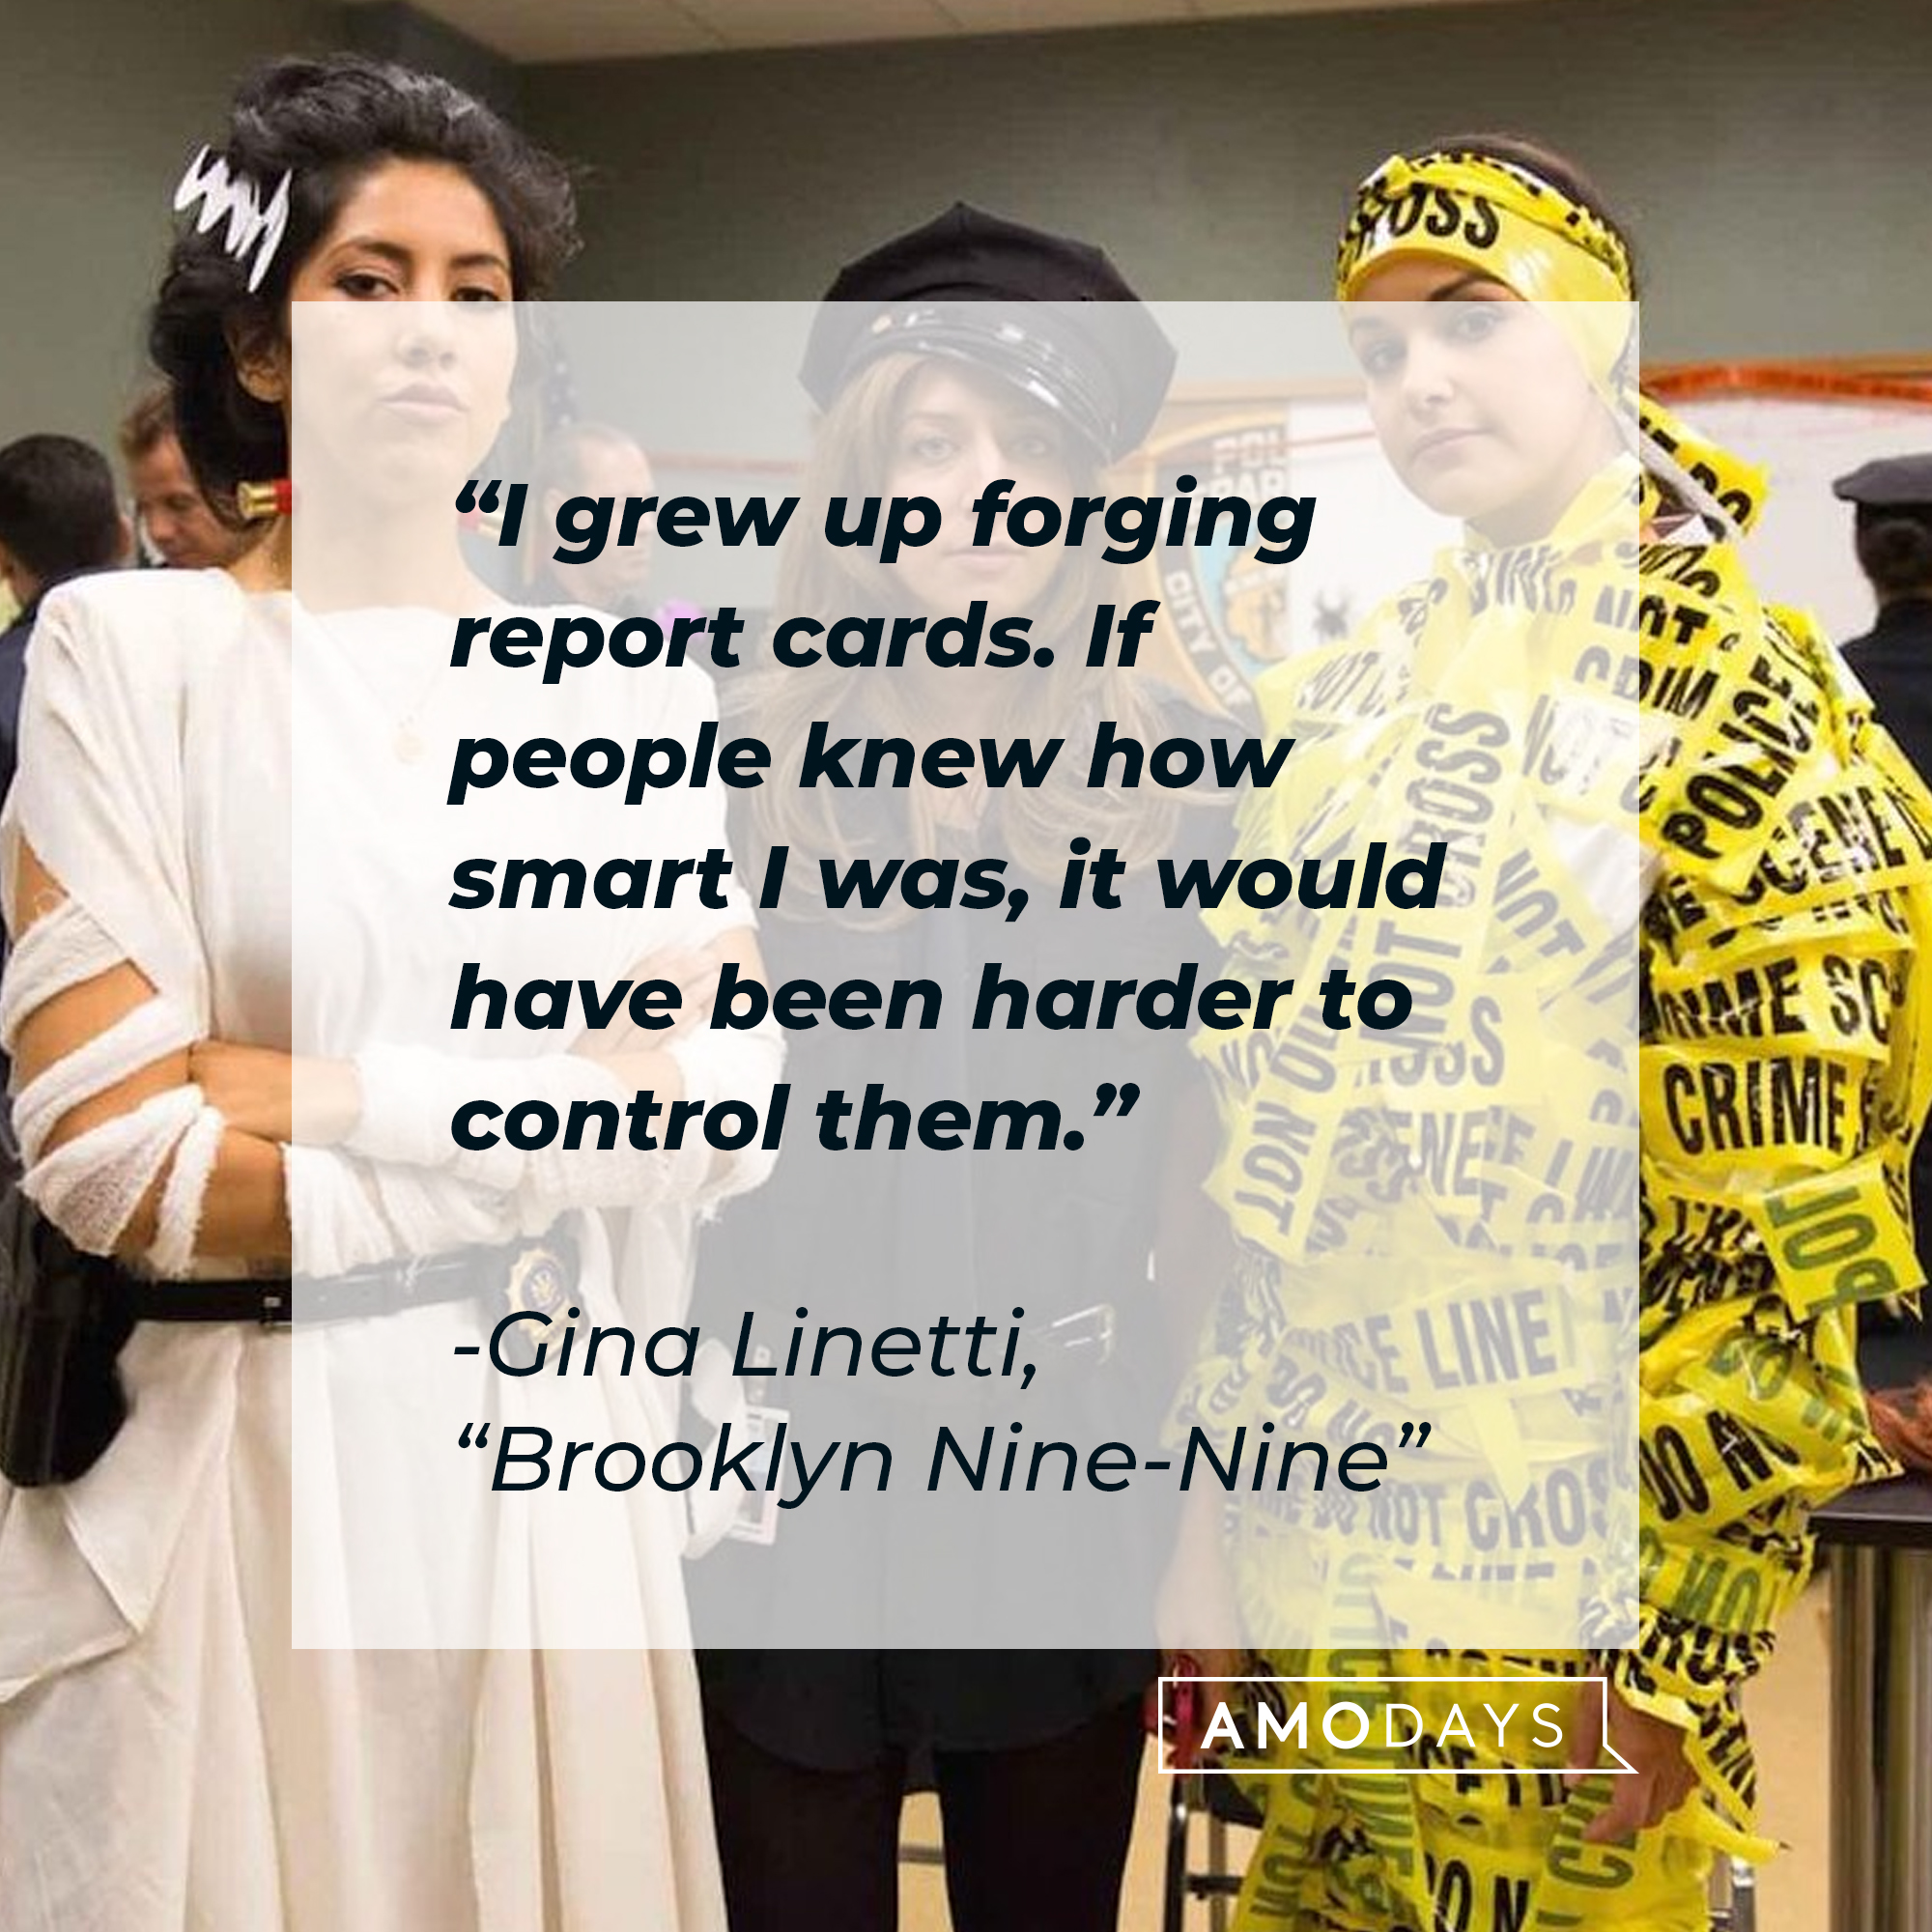 Gina Linetti with her quote: "I grew up forging report cards. If people knew how smart I was, it would have been harder to control them." | Source: Facebook.com/BrooklynNineNine